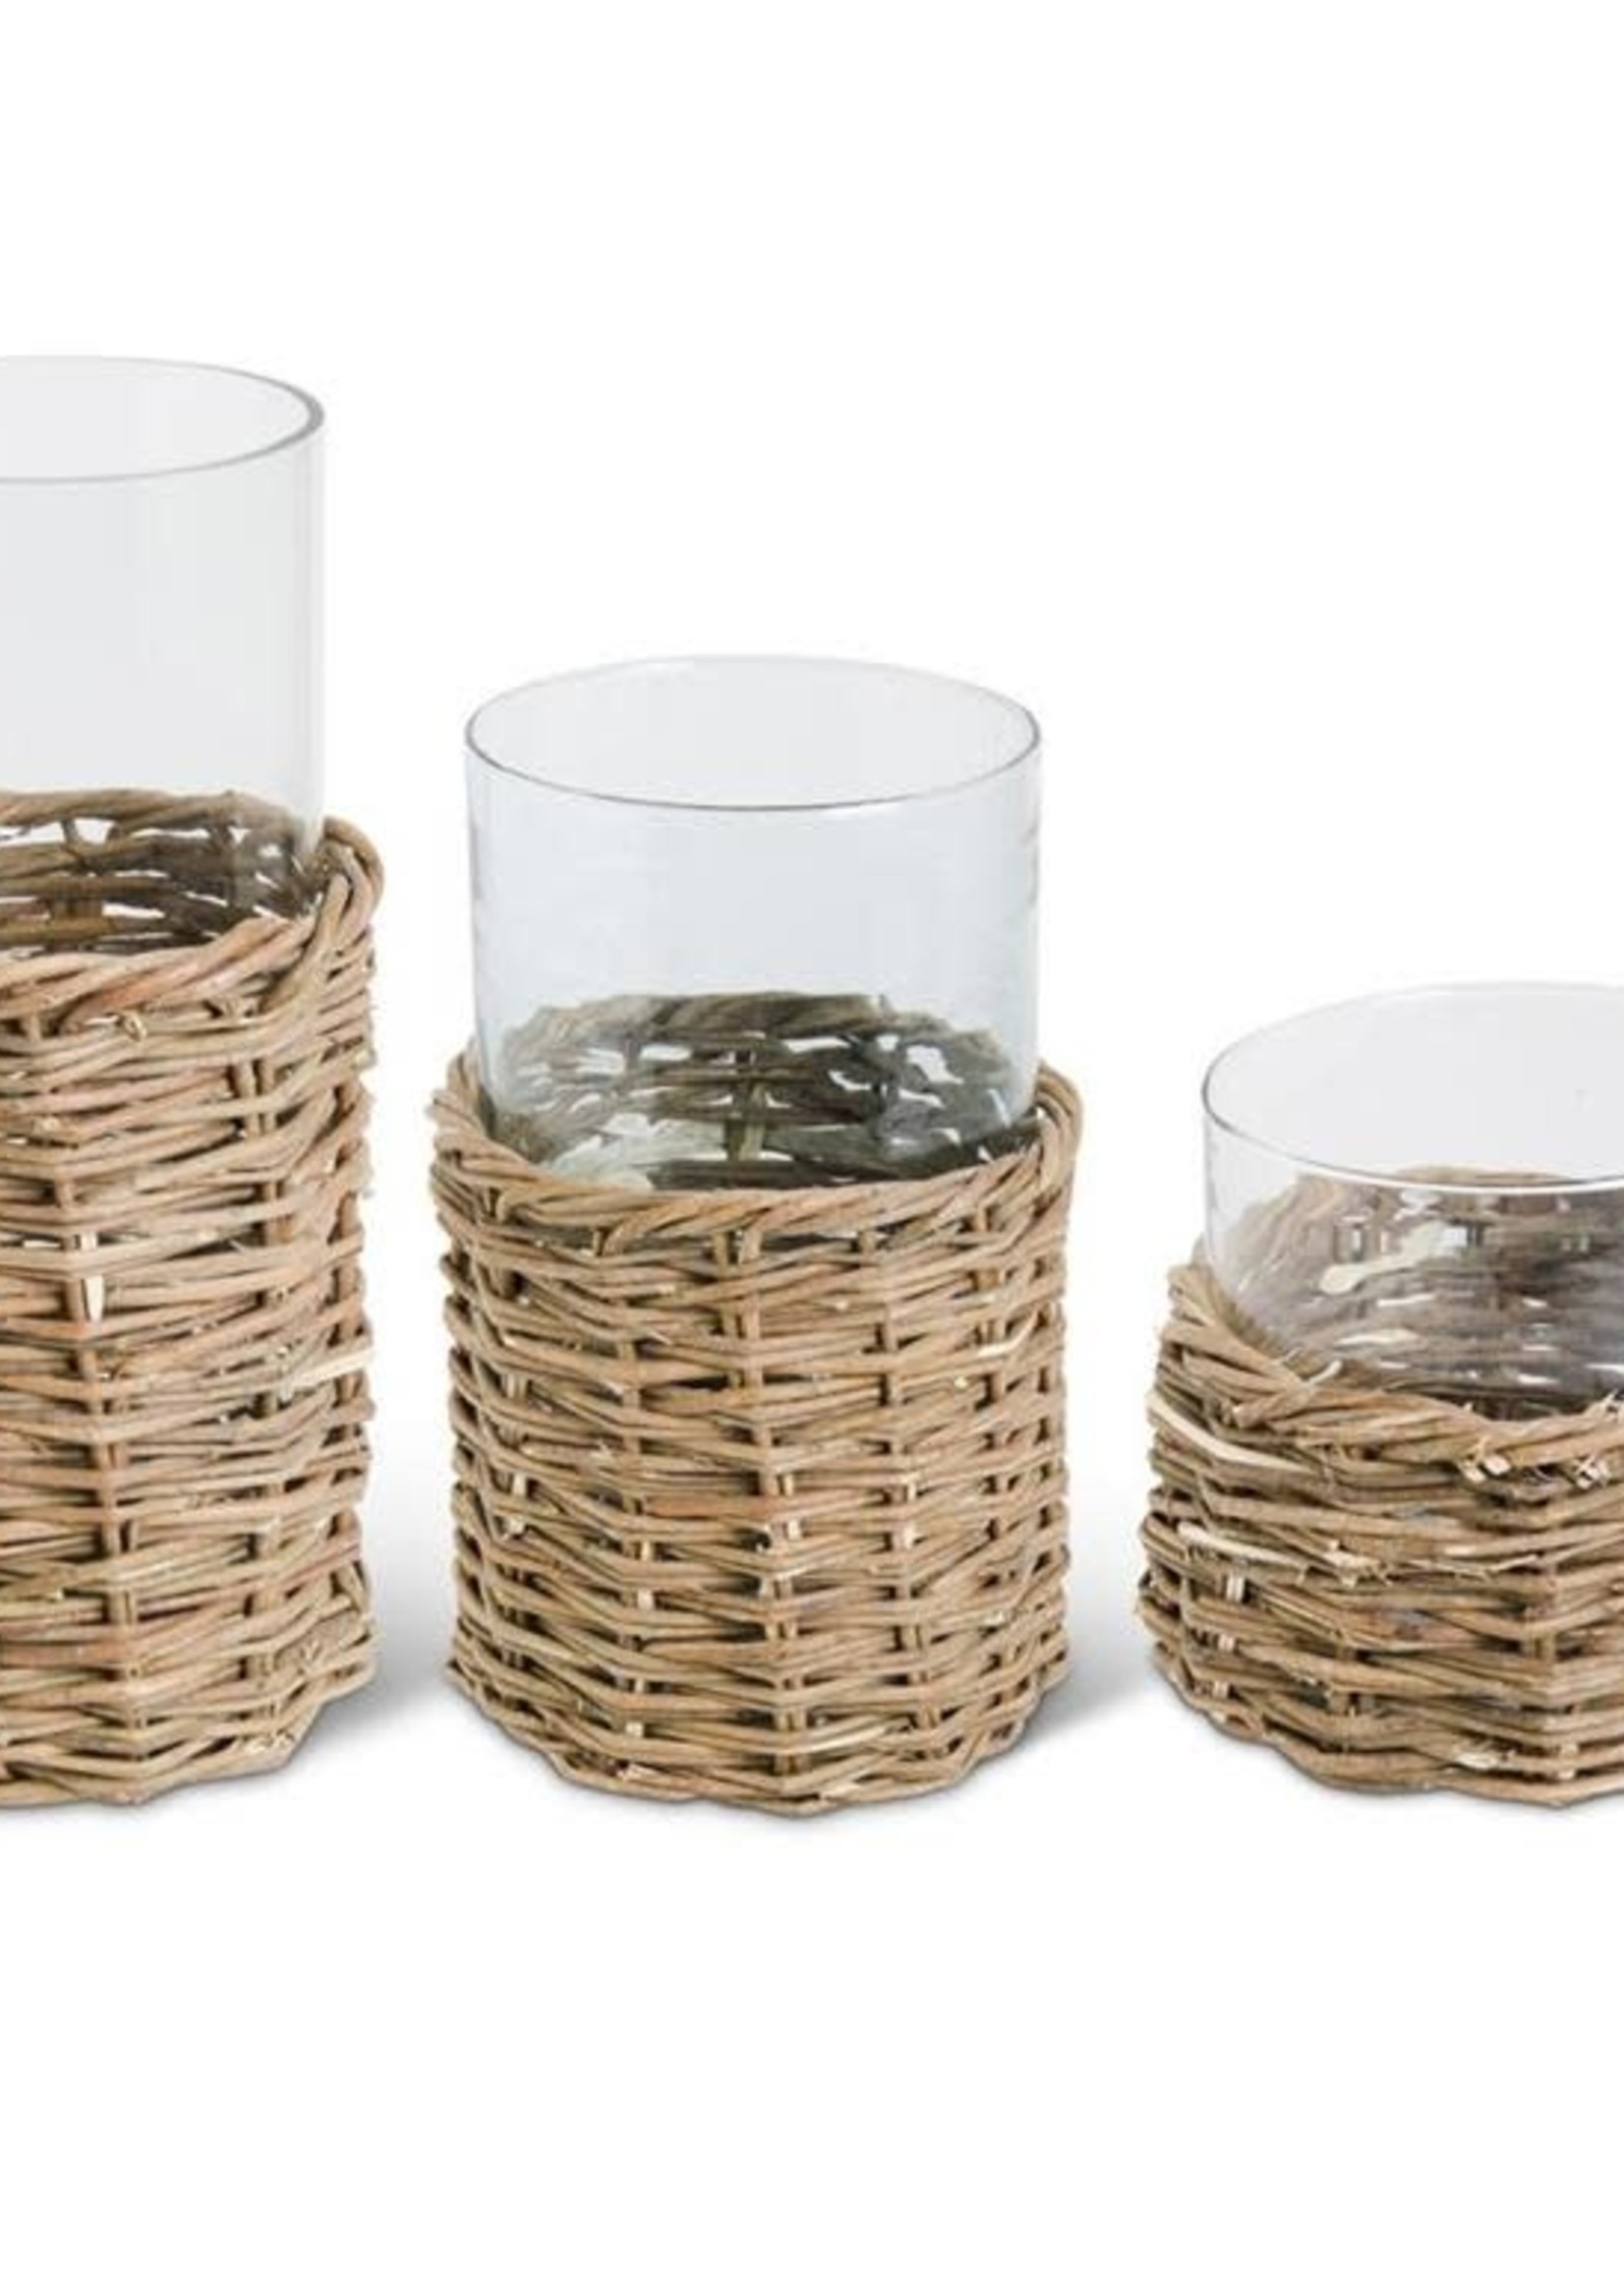 Design Decor Clear Glass Cylinders in Woven Rattan Basket Small